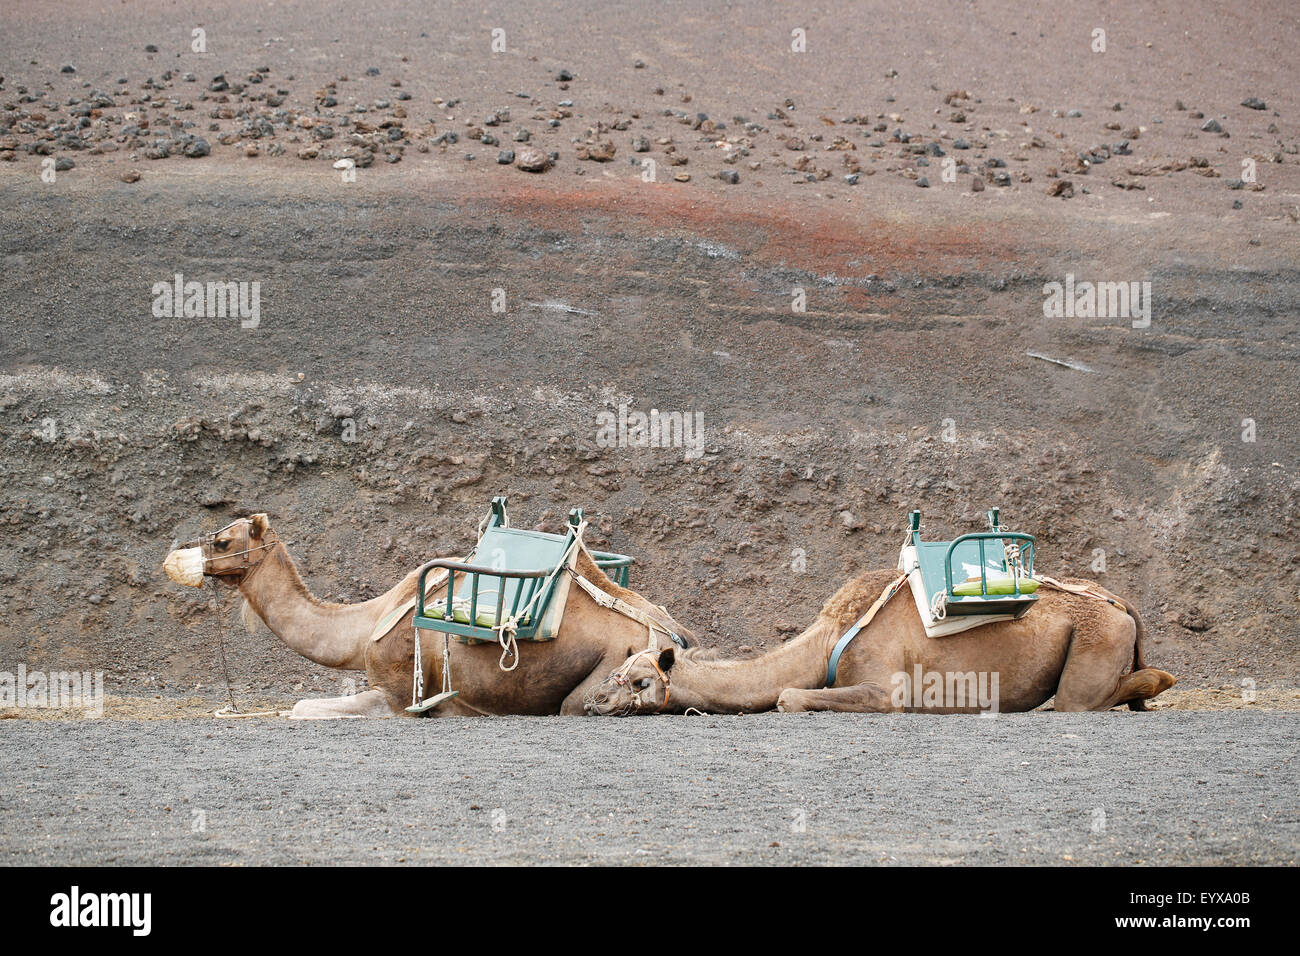 Two dromedary camels, Camelus dromedarius, part of a larger tourist train in Lanzarote, Spain lie down resting between groups of visiting tourists Stock Photo